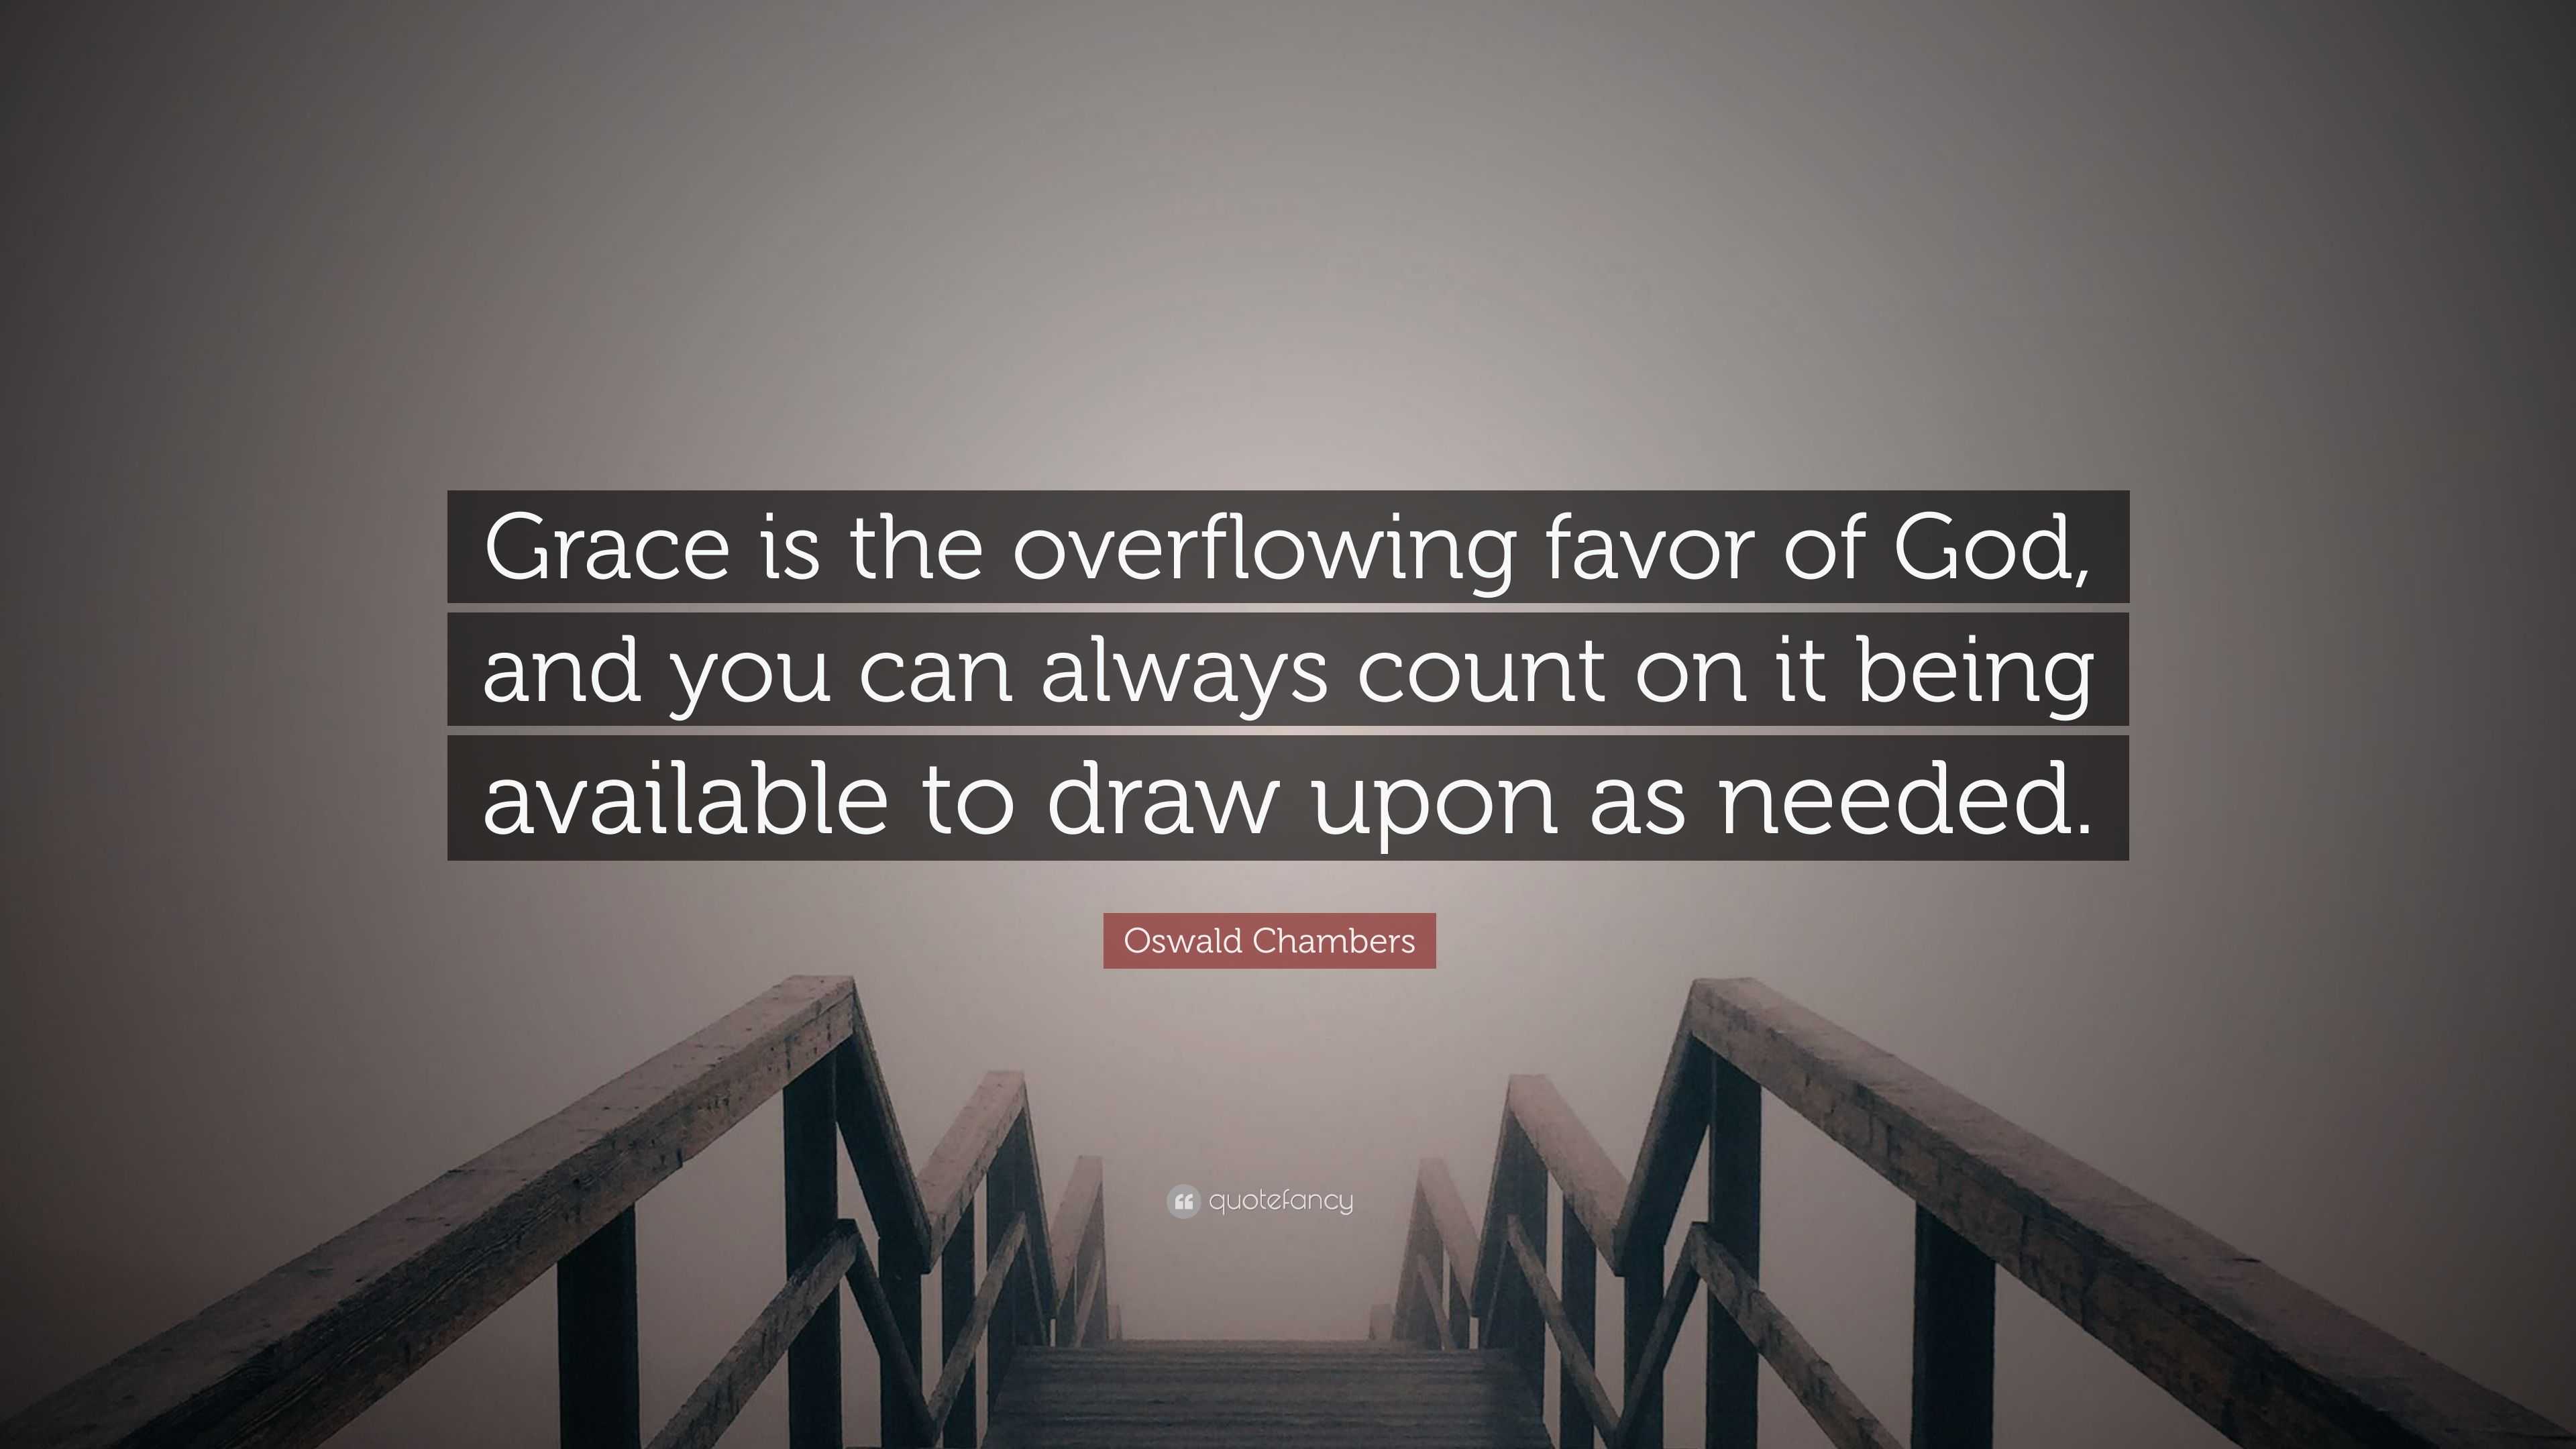 The overflowing grace of God